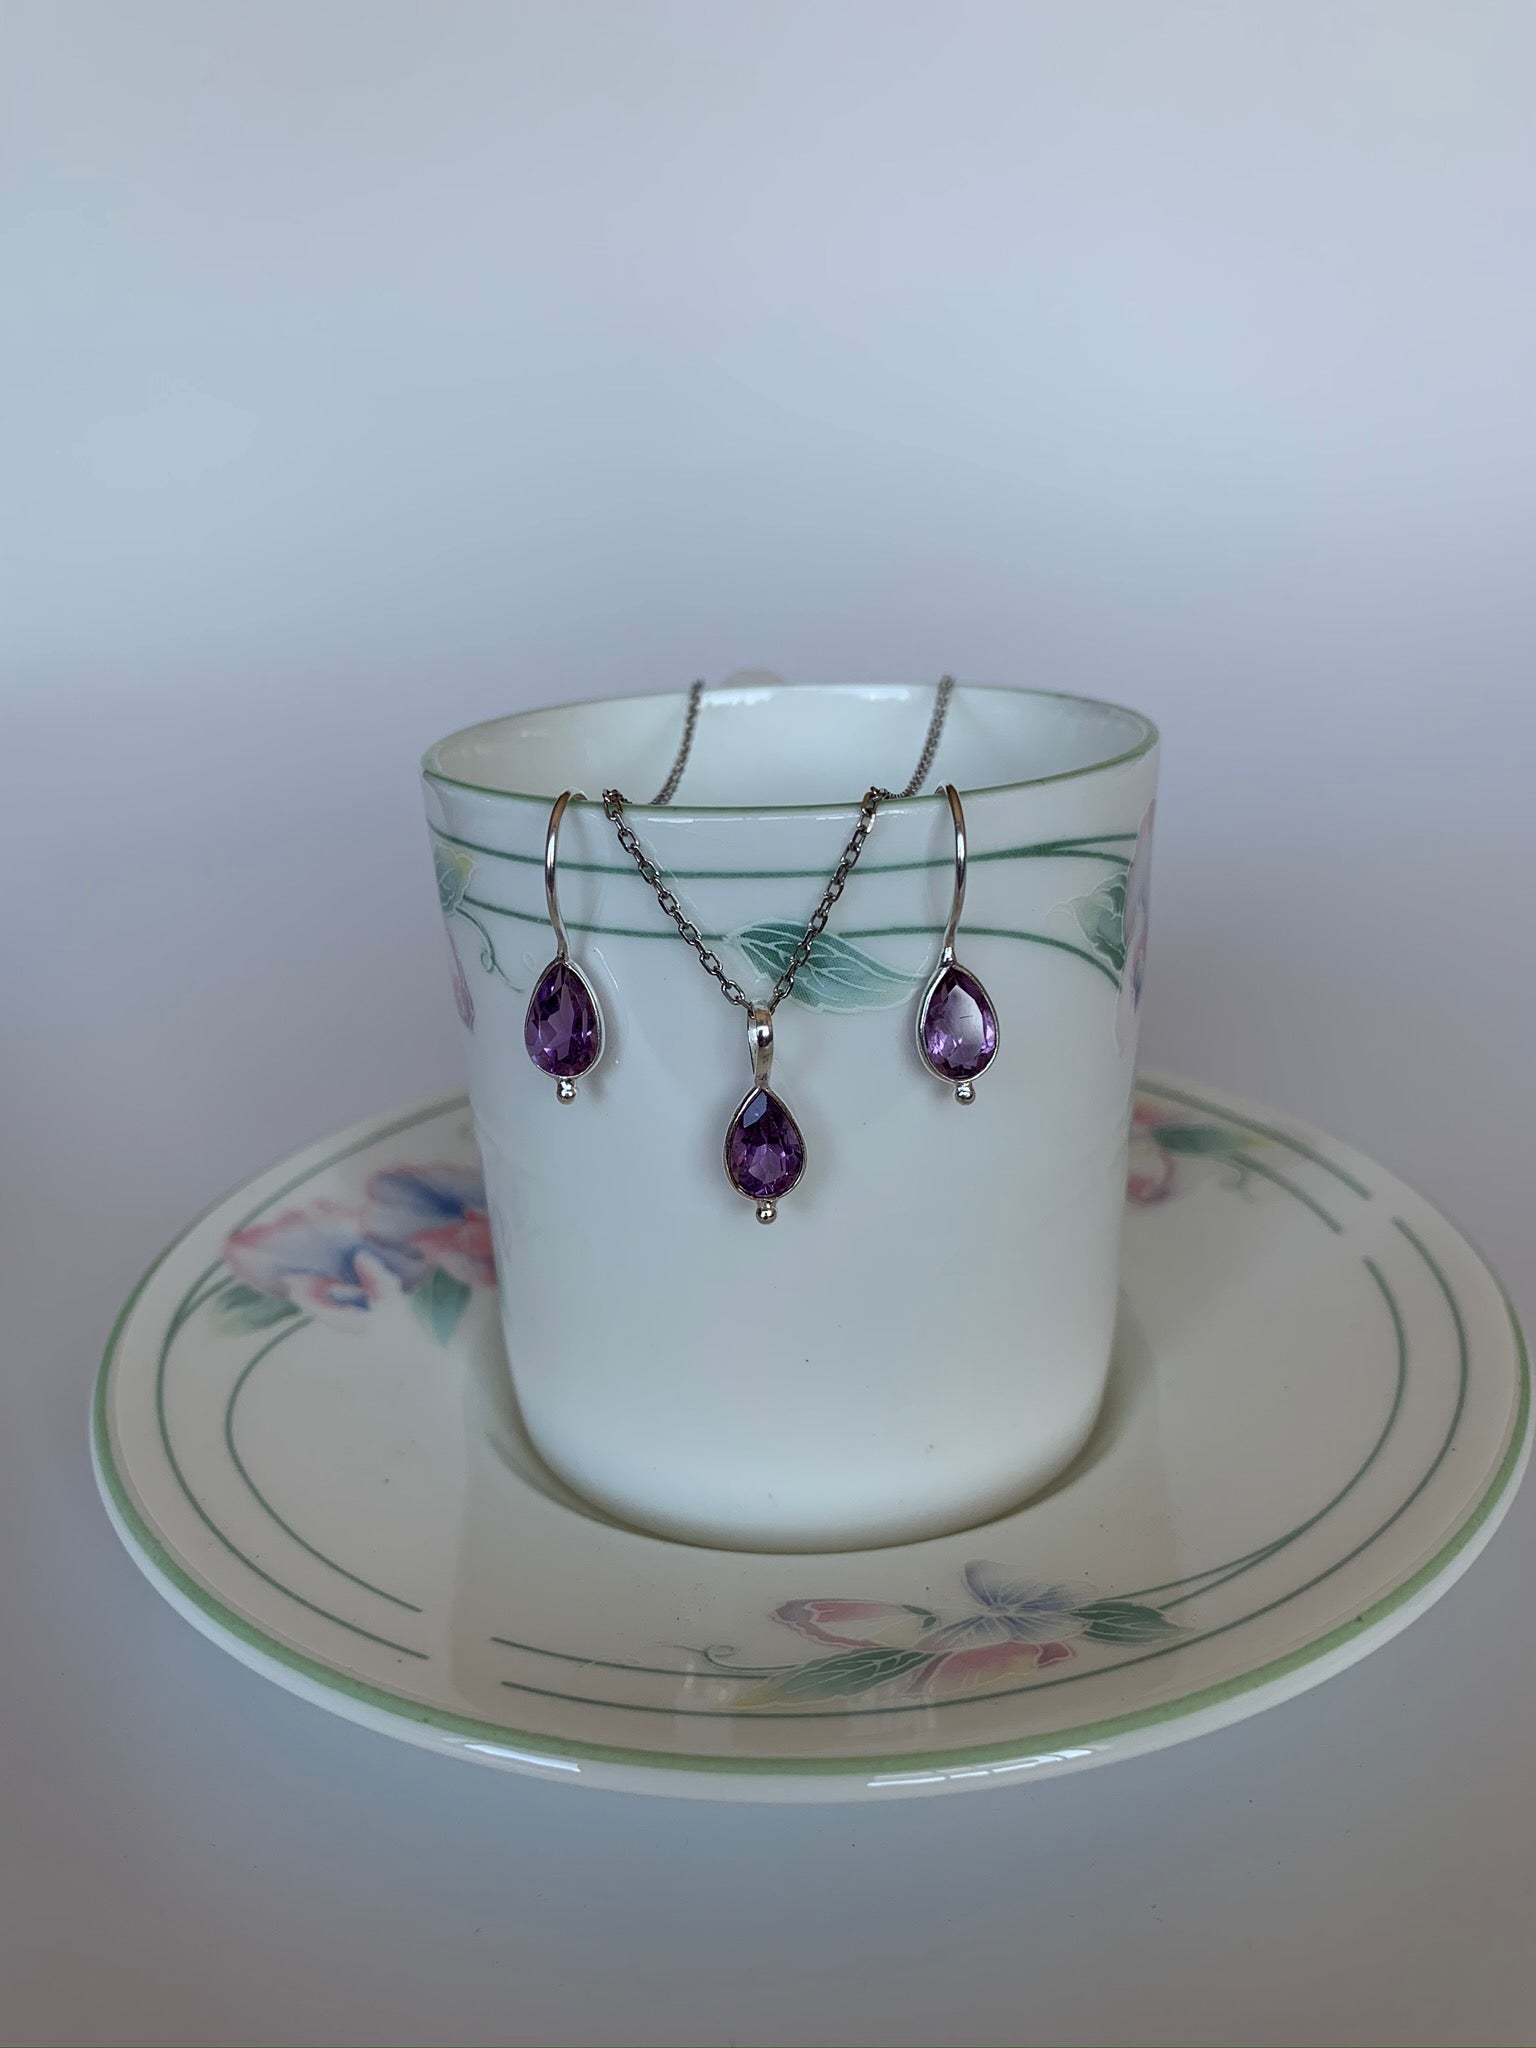 Earrings & pendant birthstone set (February). Small teardrop amethyst gemstones set in sterling silver. Earrings have wires, not posts.  Necklace chain is not included.